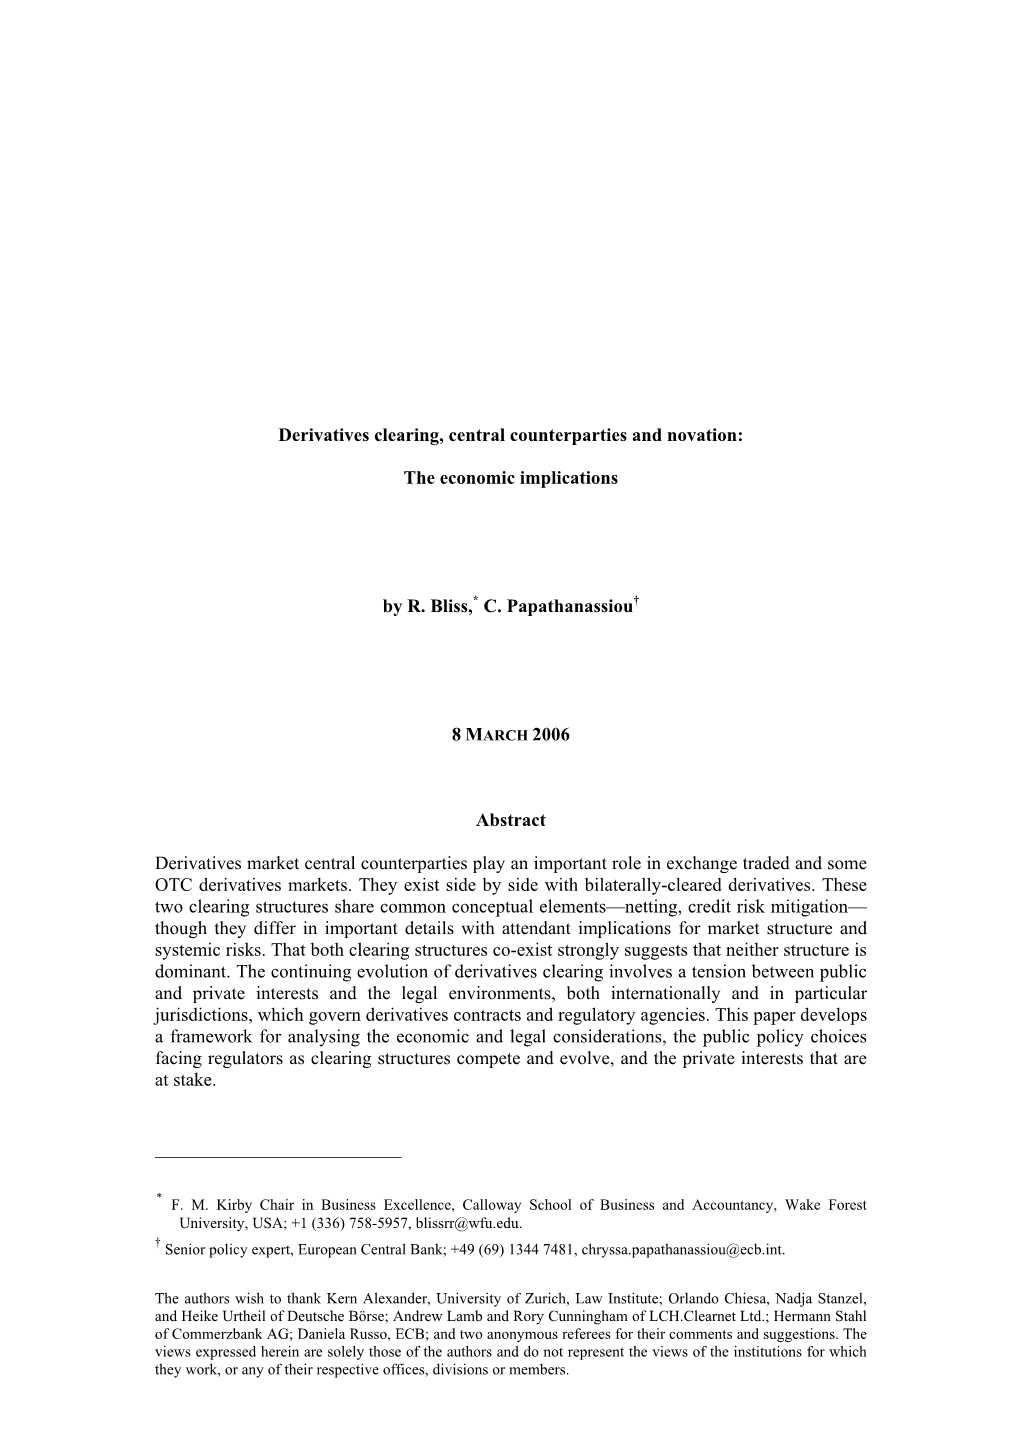 Paper on Corporate Governance of Securities Settlement Systems